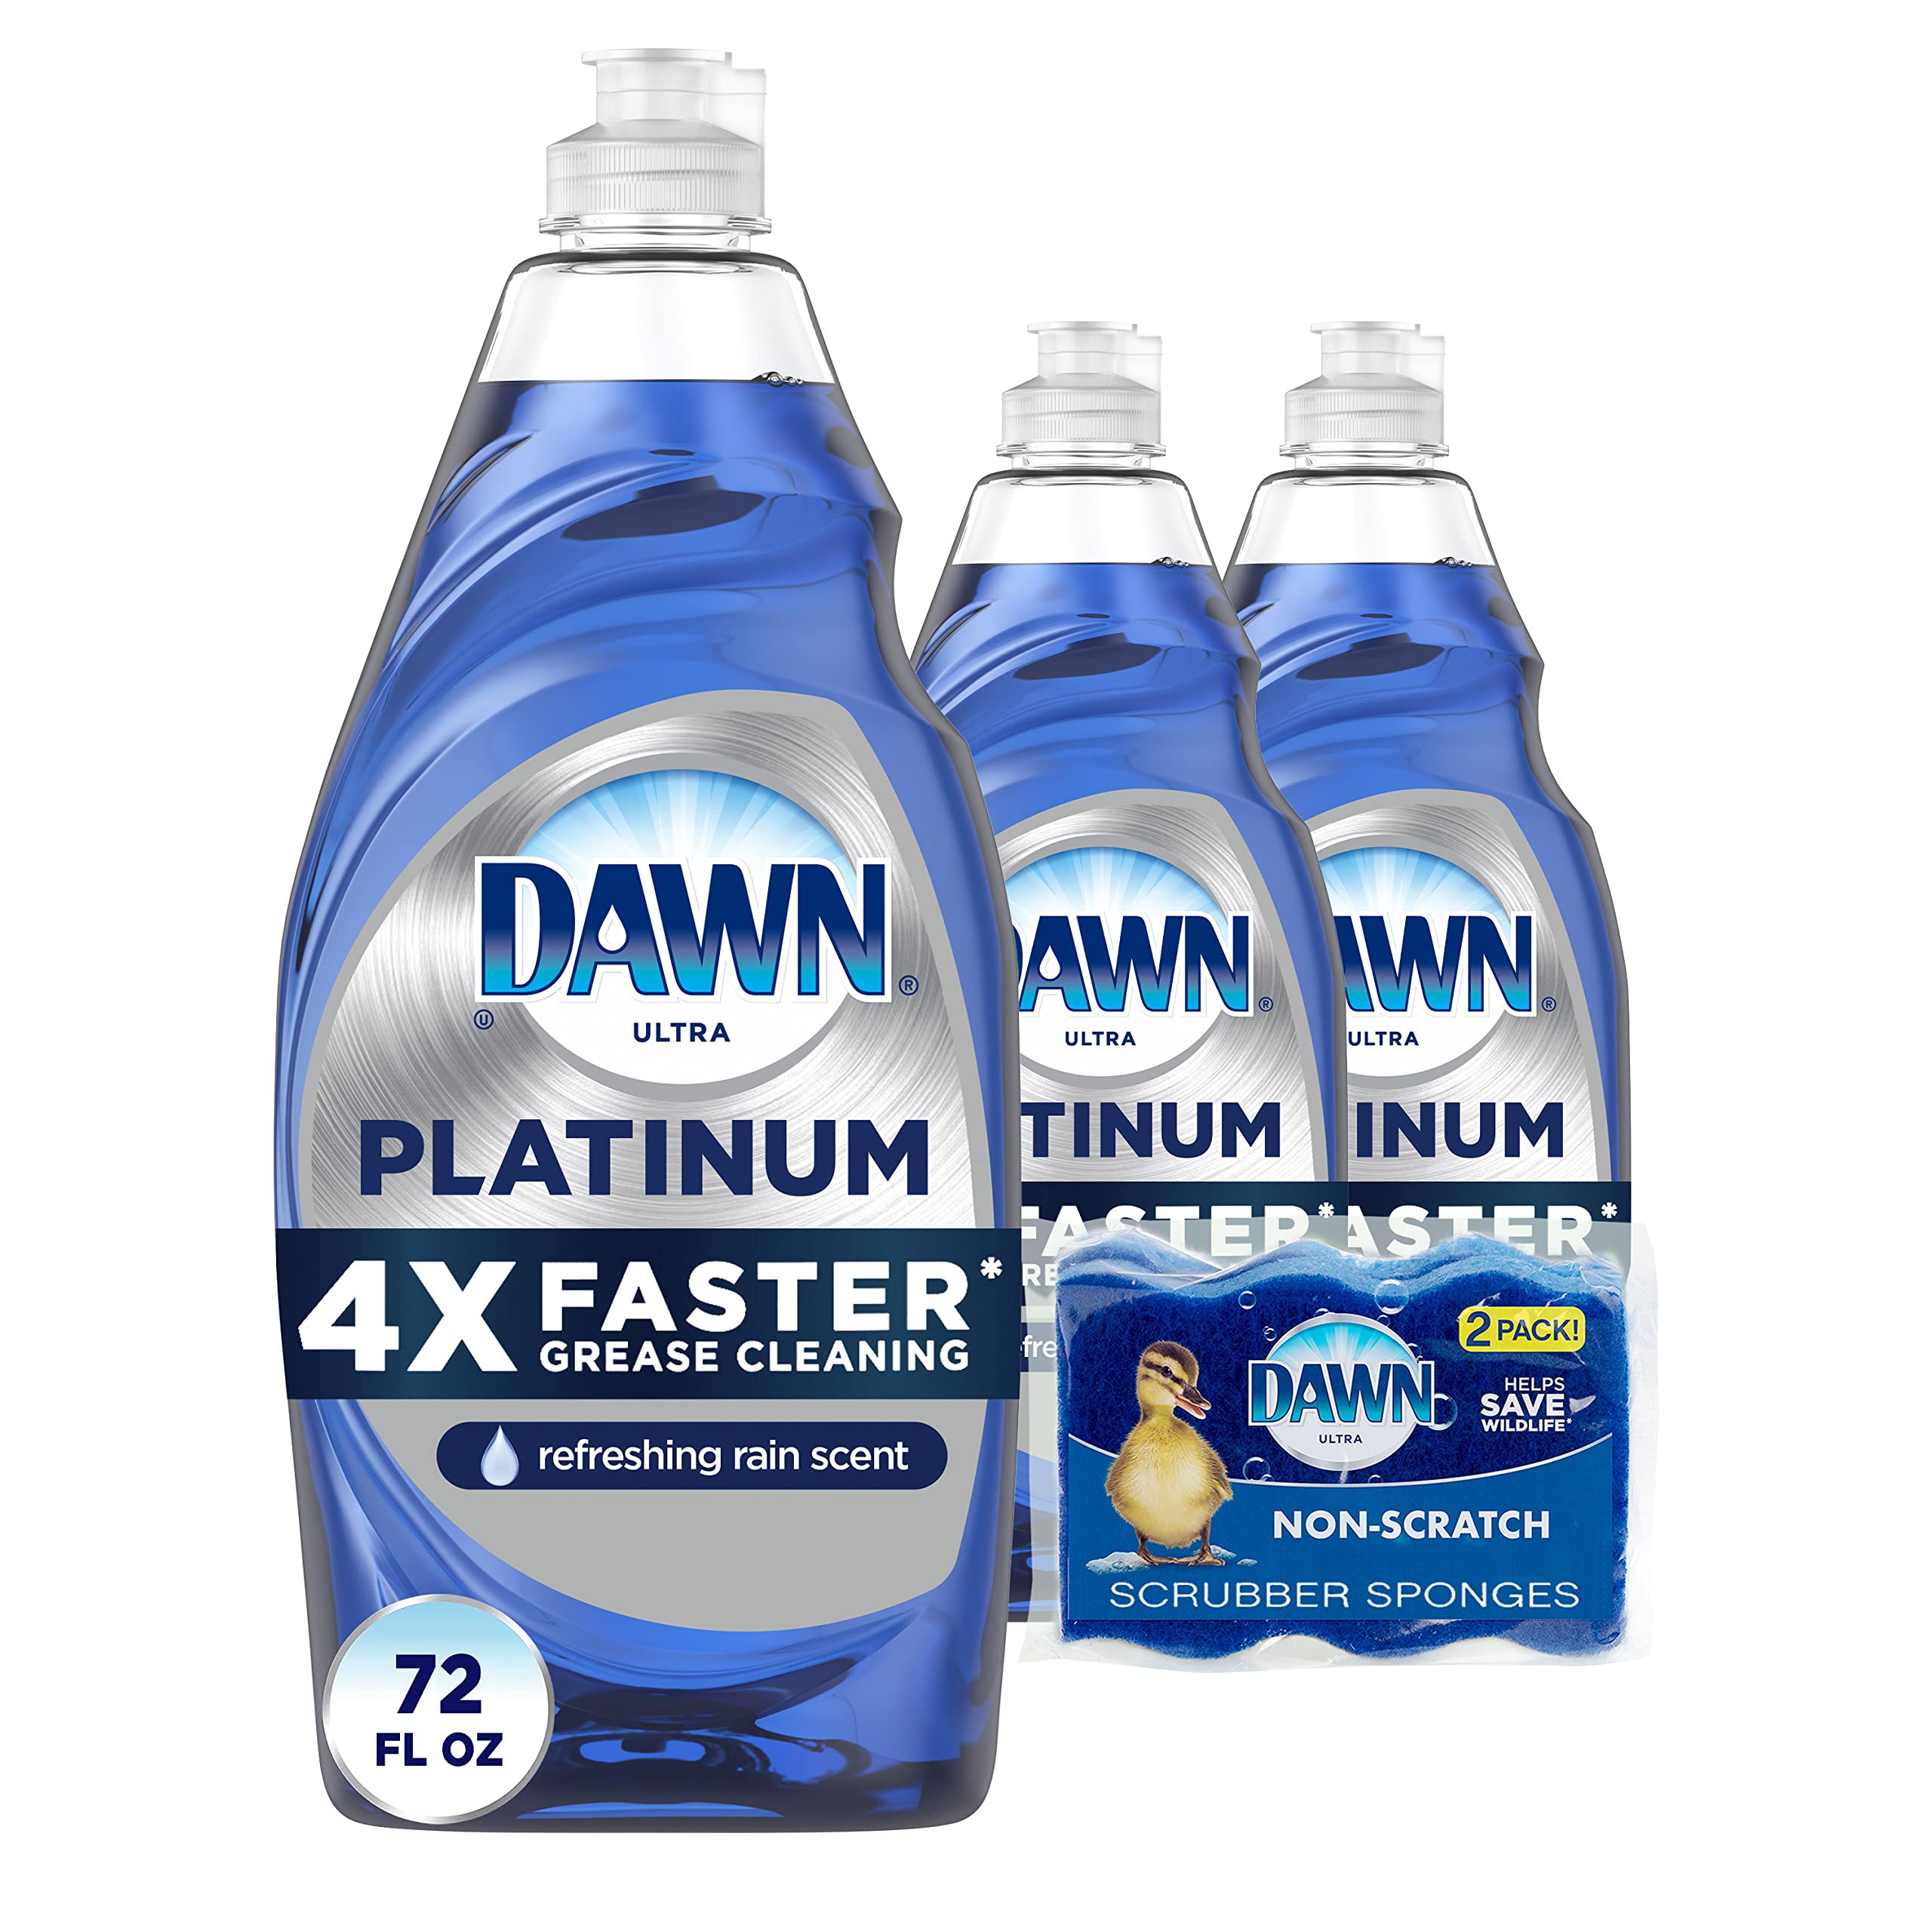 Book Cover Dawn Dish Soap Platinum Dishwashing Liquid + Non-Scratch Sponges for Dishes, Refreshing Rain Scent, Includes 3x24oz + 2 Sponges (Packaging May Vary) Rain 5 Piece Set